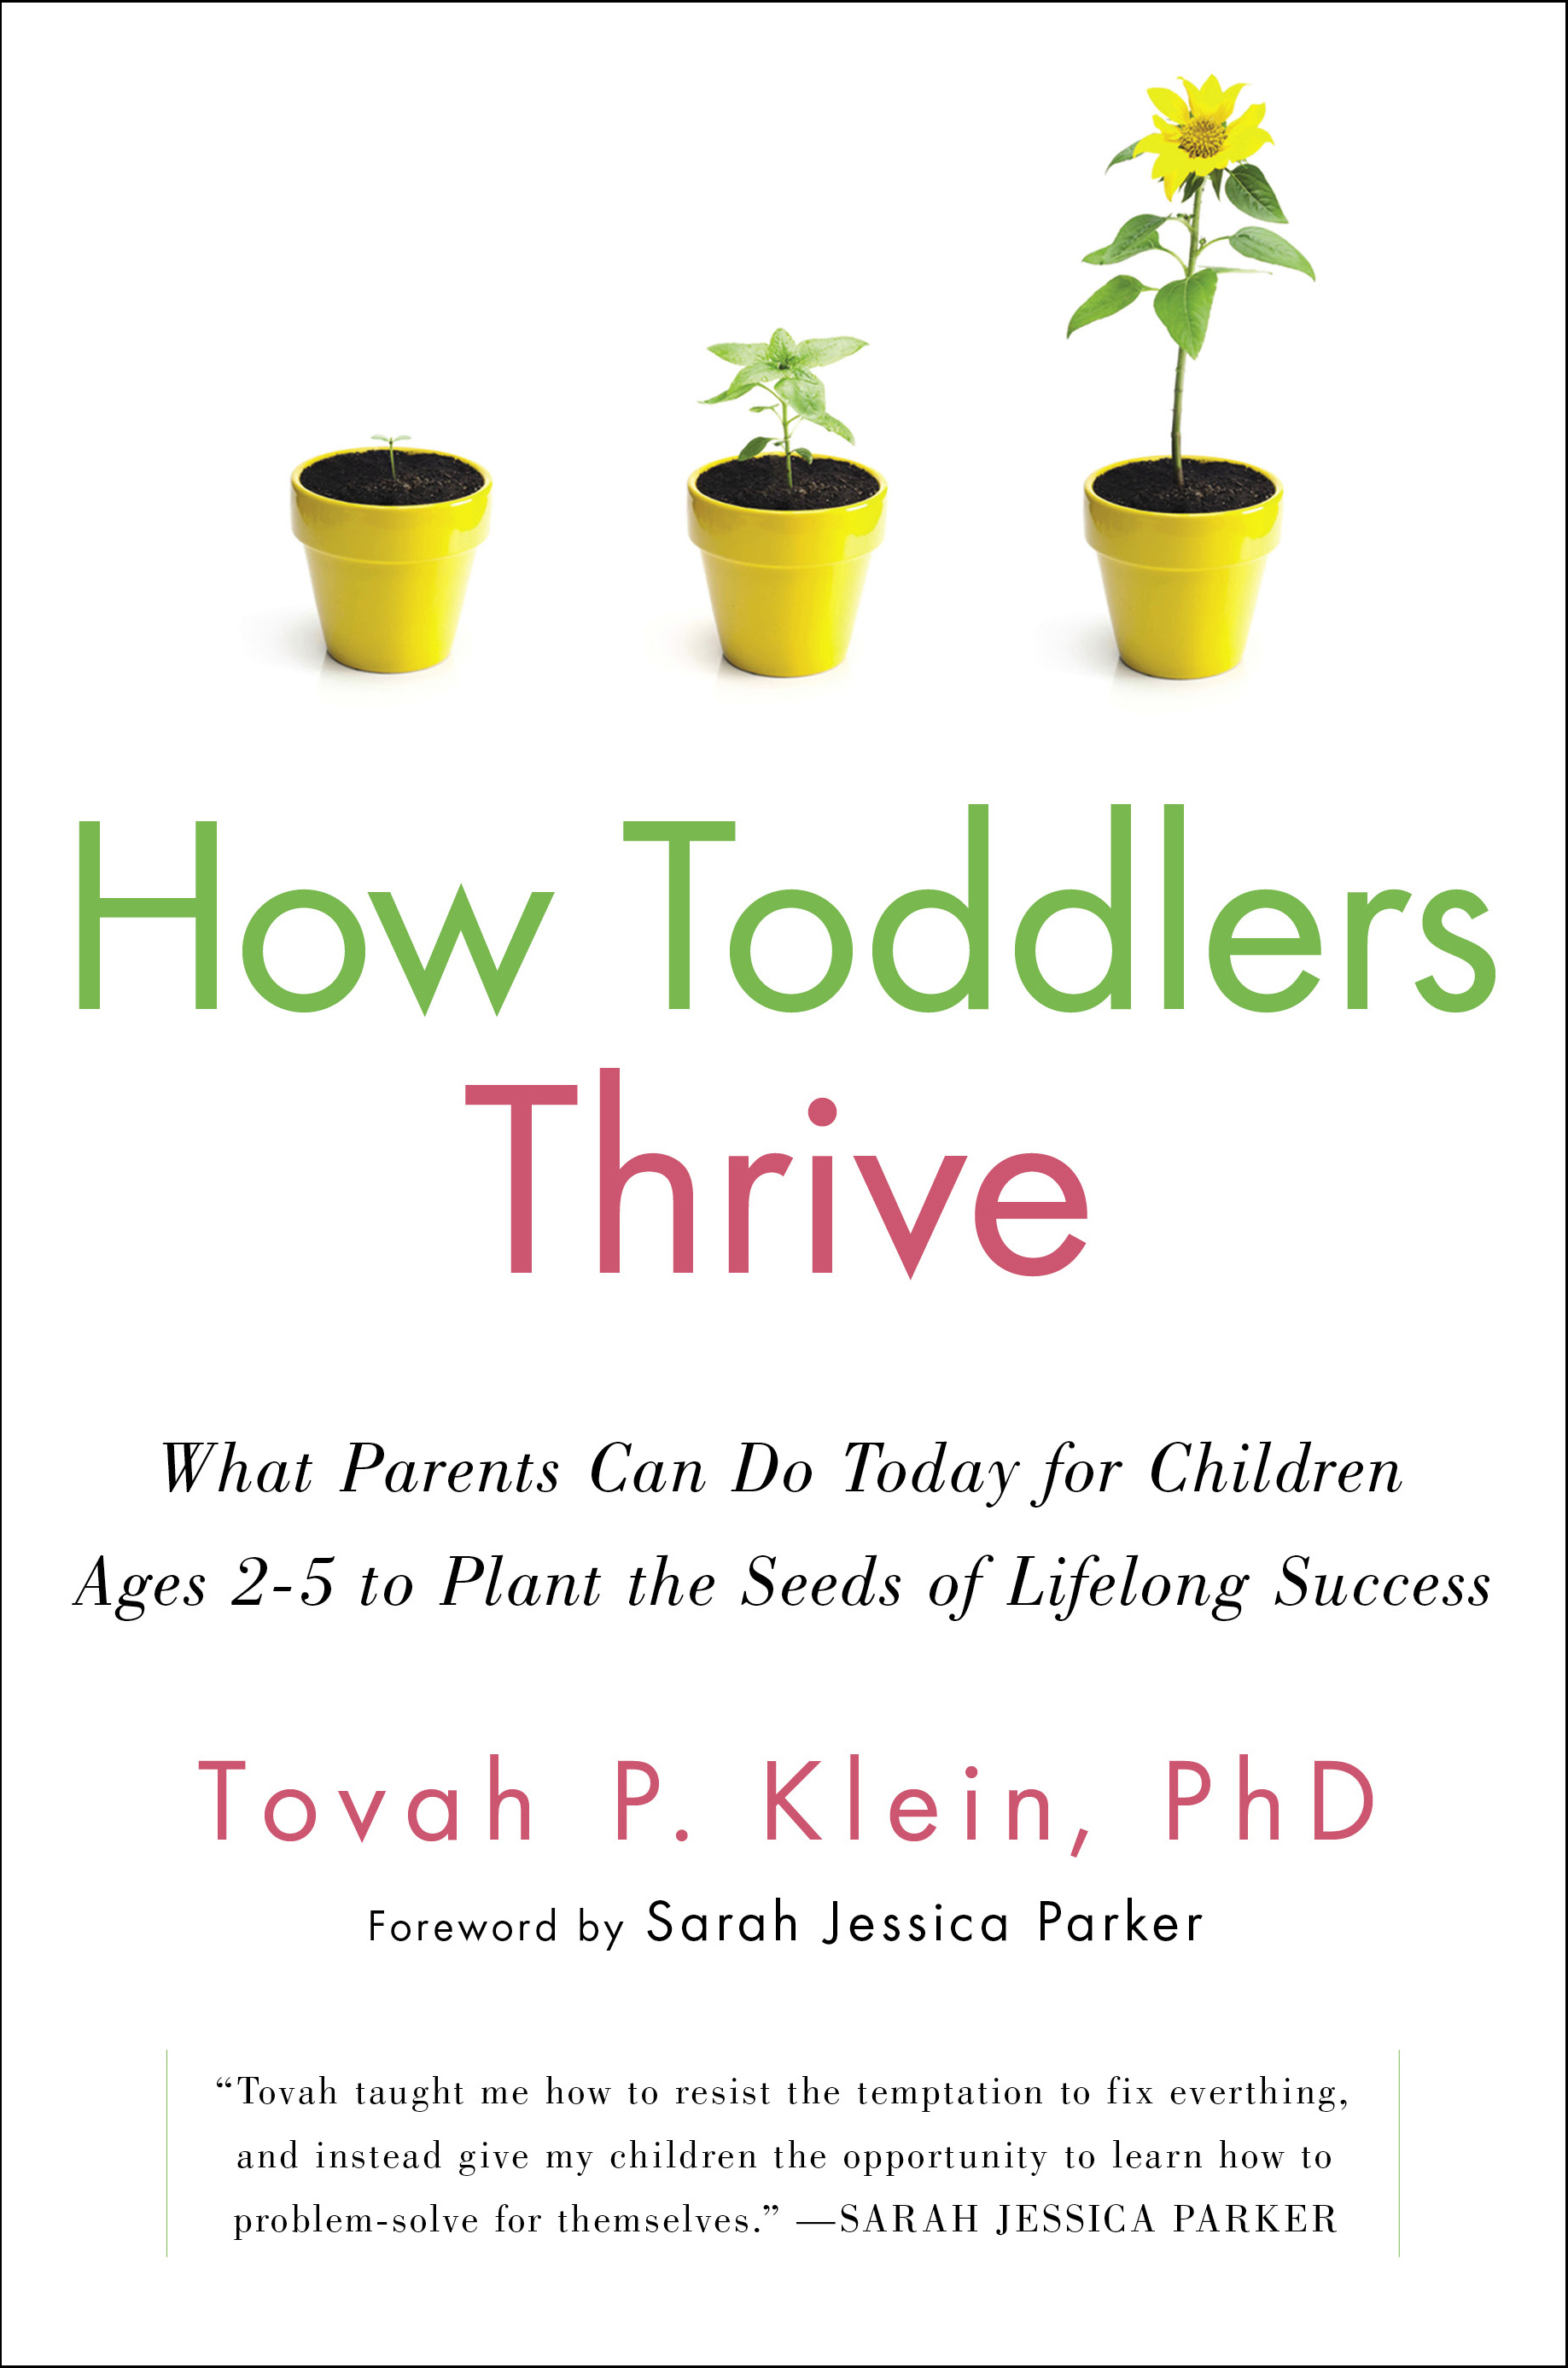 GEM Recommends: How Toddlers Thrive